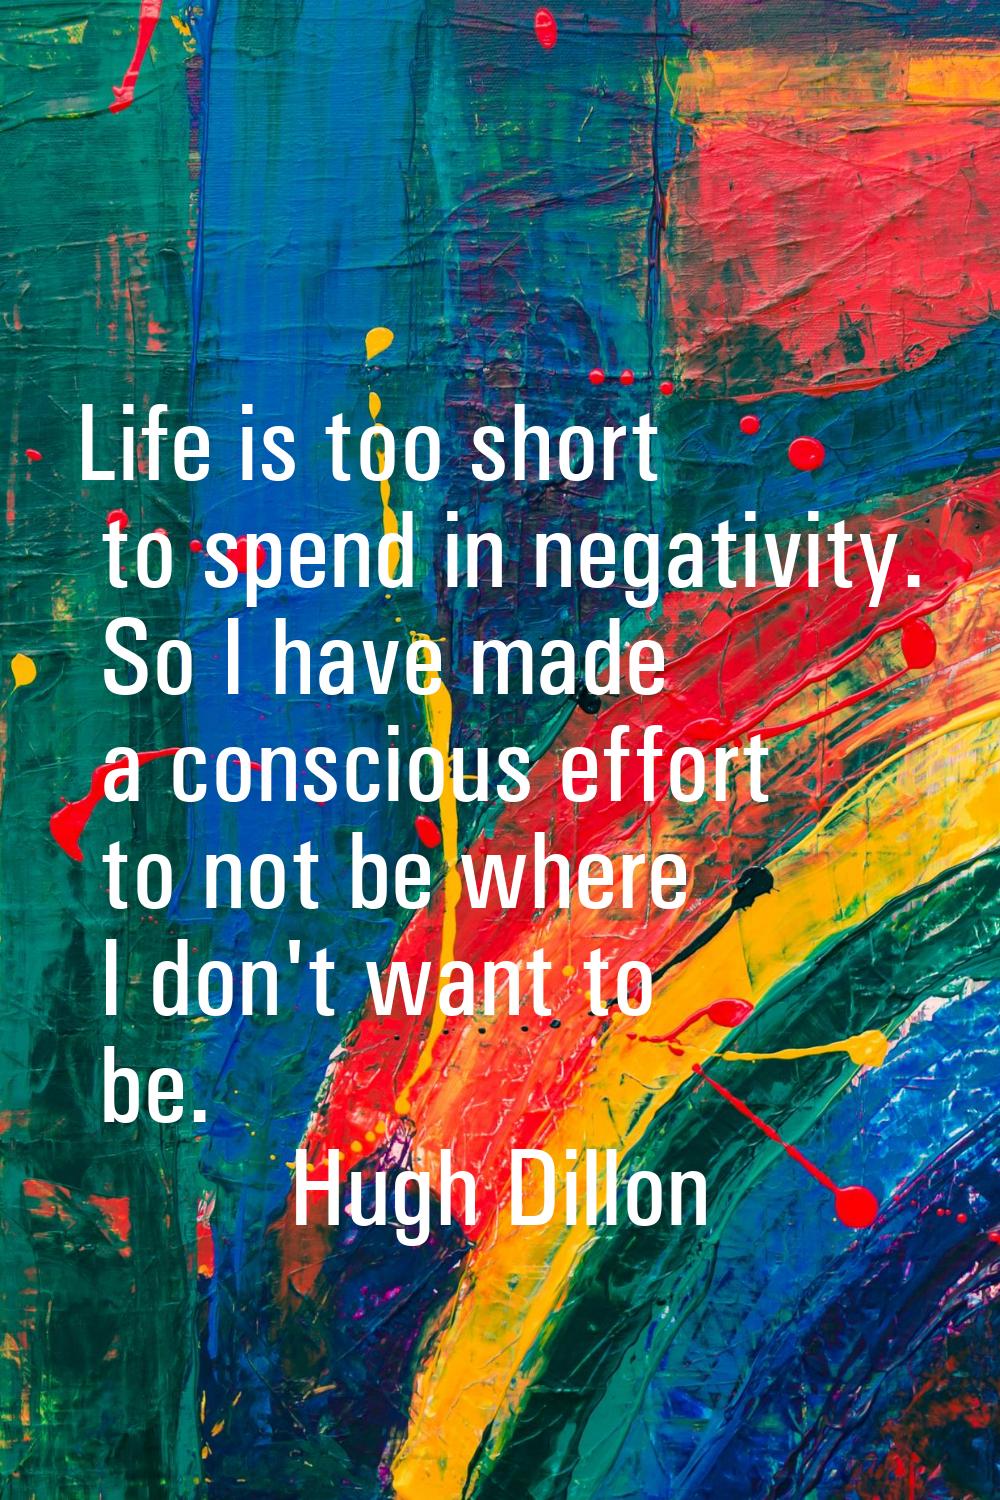 Life is too short to spend in negativity. So I have made a conscious effort to not be where I don't